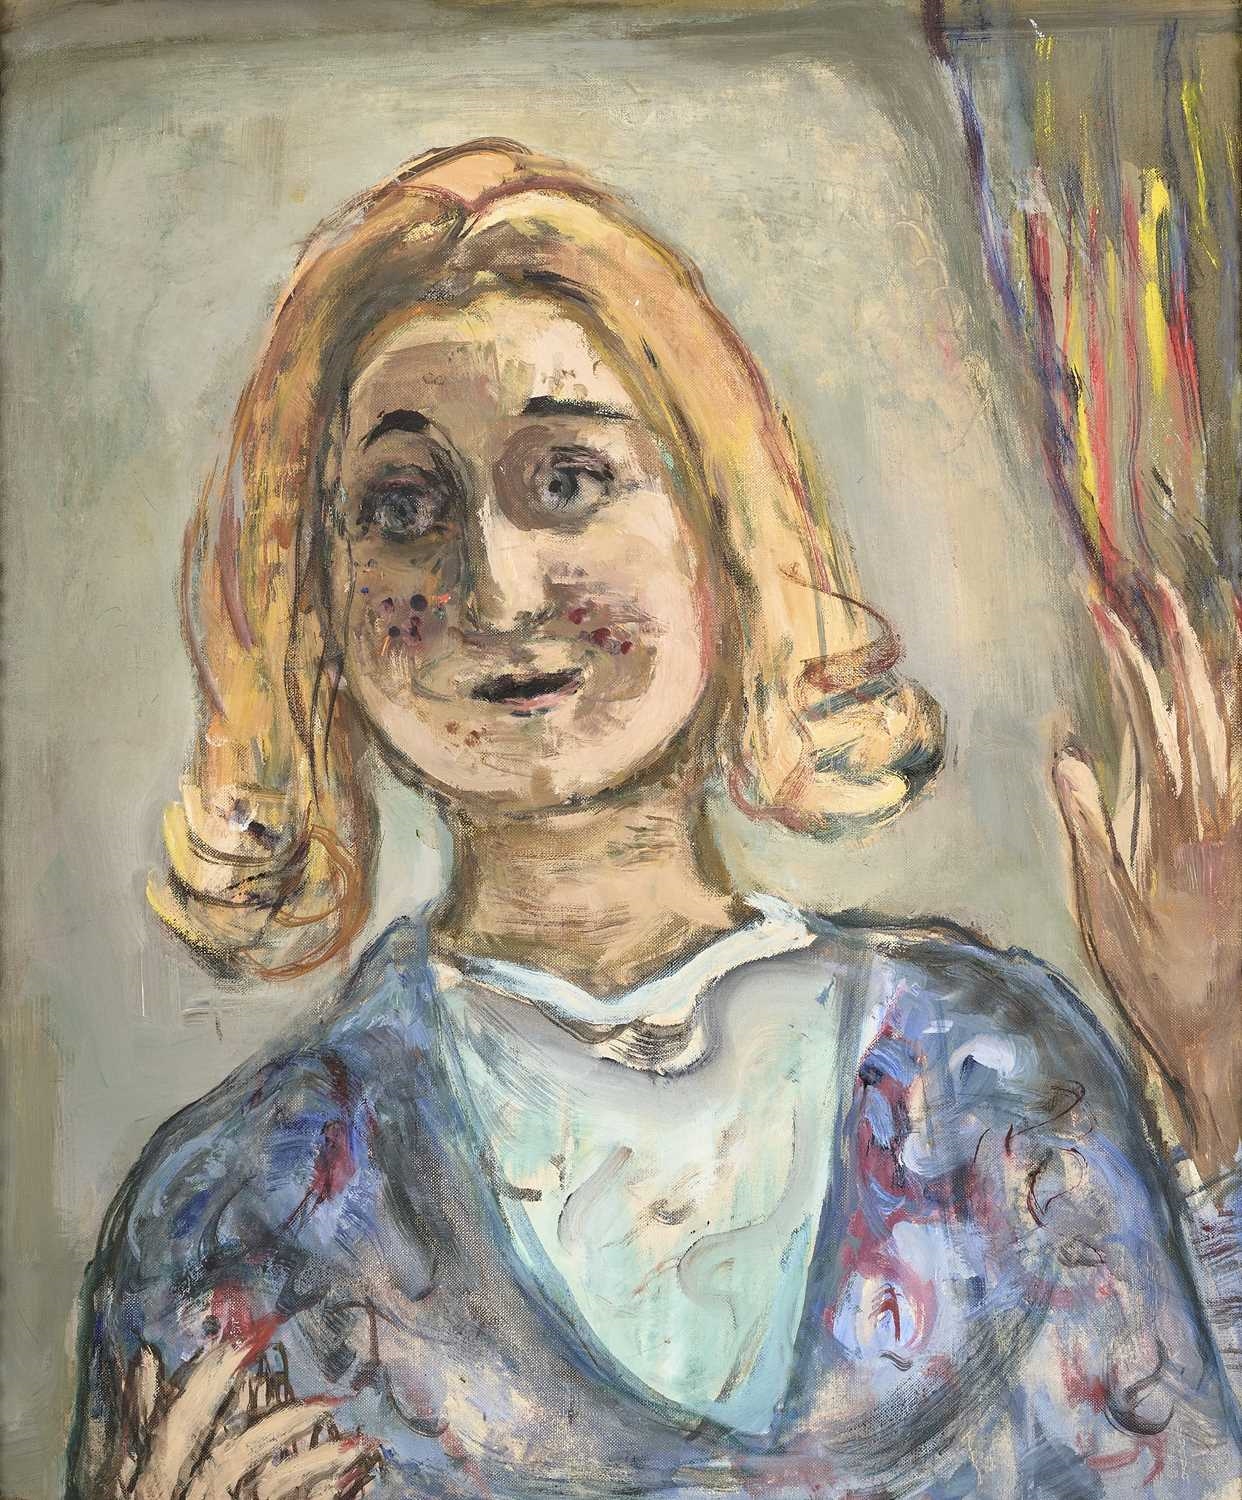 BLONDE WOMAN by Marie-Louise von Motesiczky, Painted in 1960